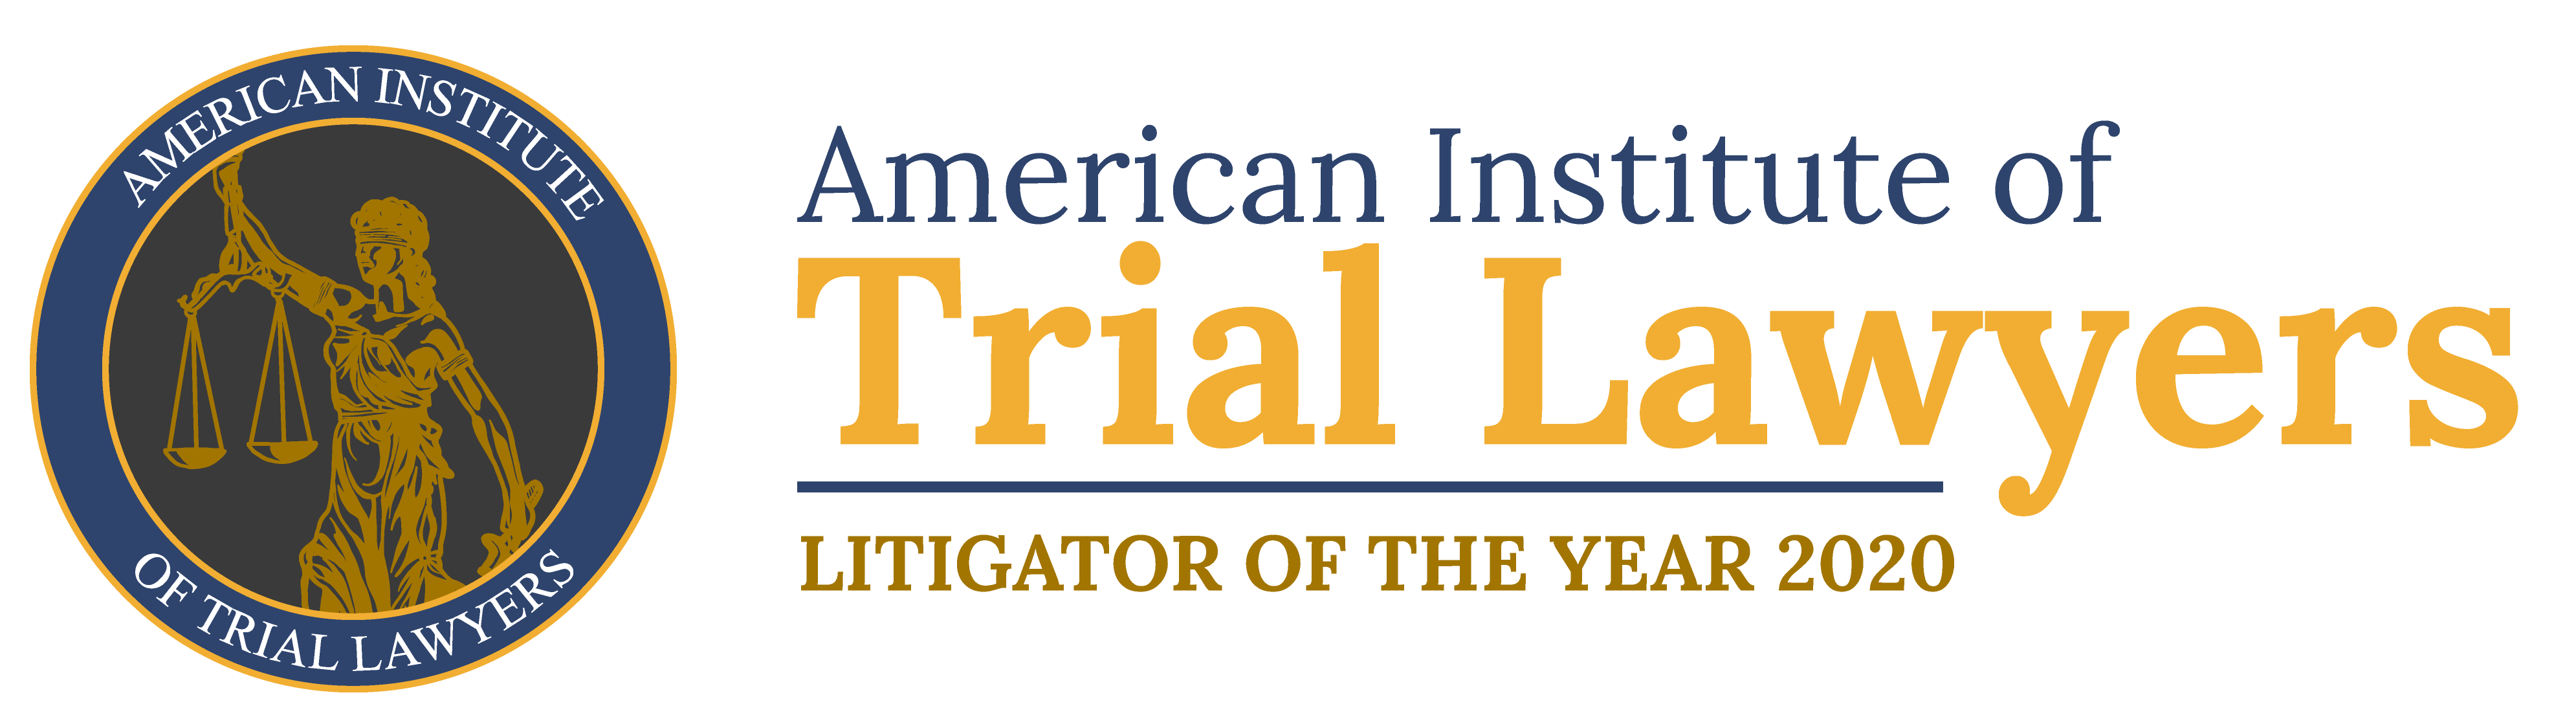 American Institute of Trial Lawyers 2020 Litigator of the Year